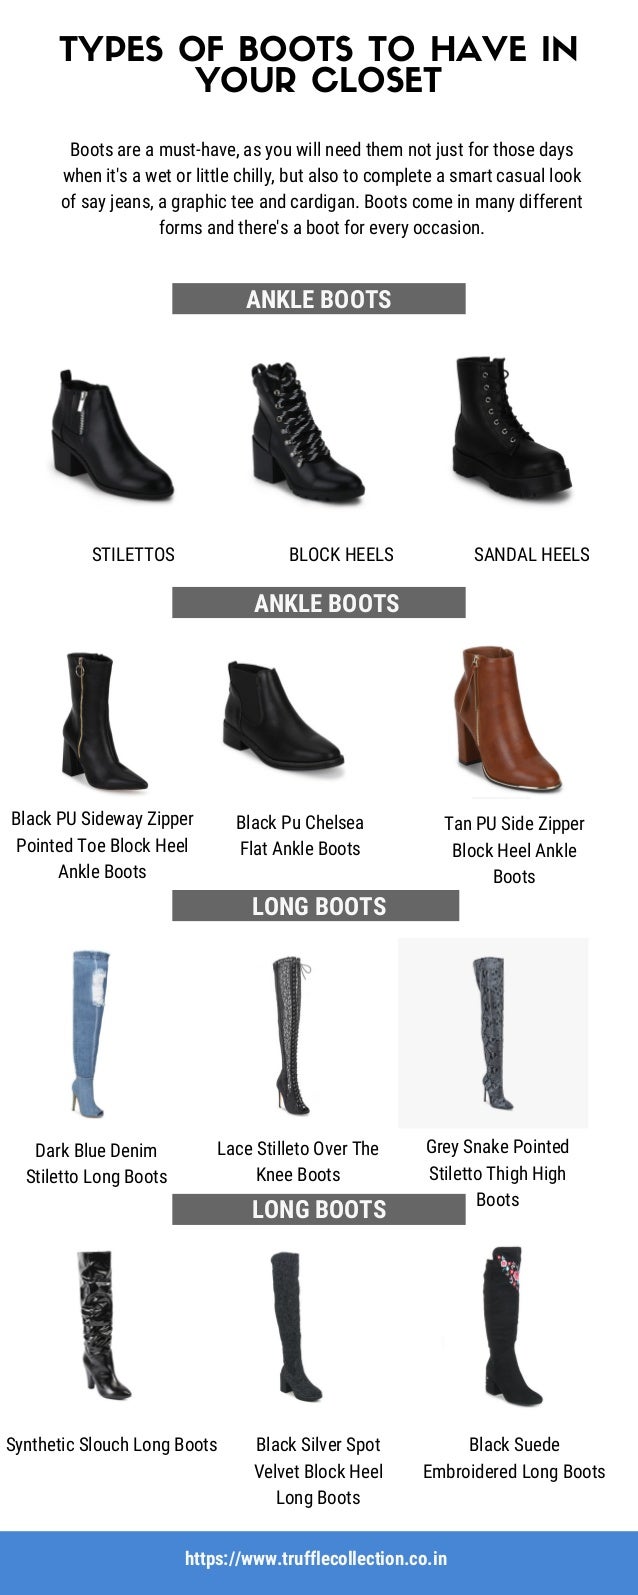 Types of boots to have in your closet